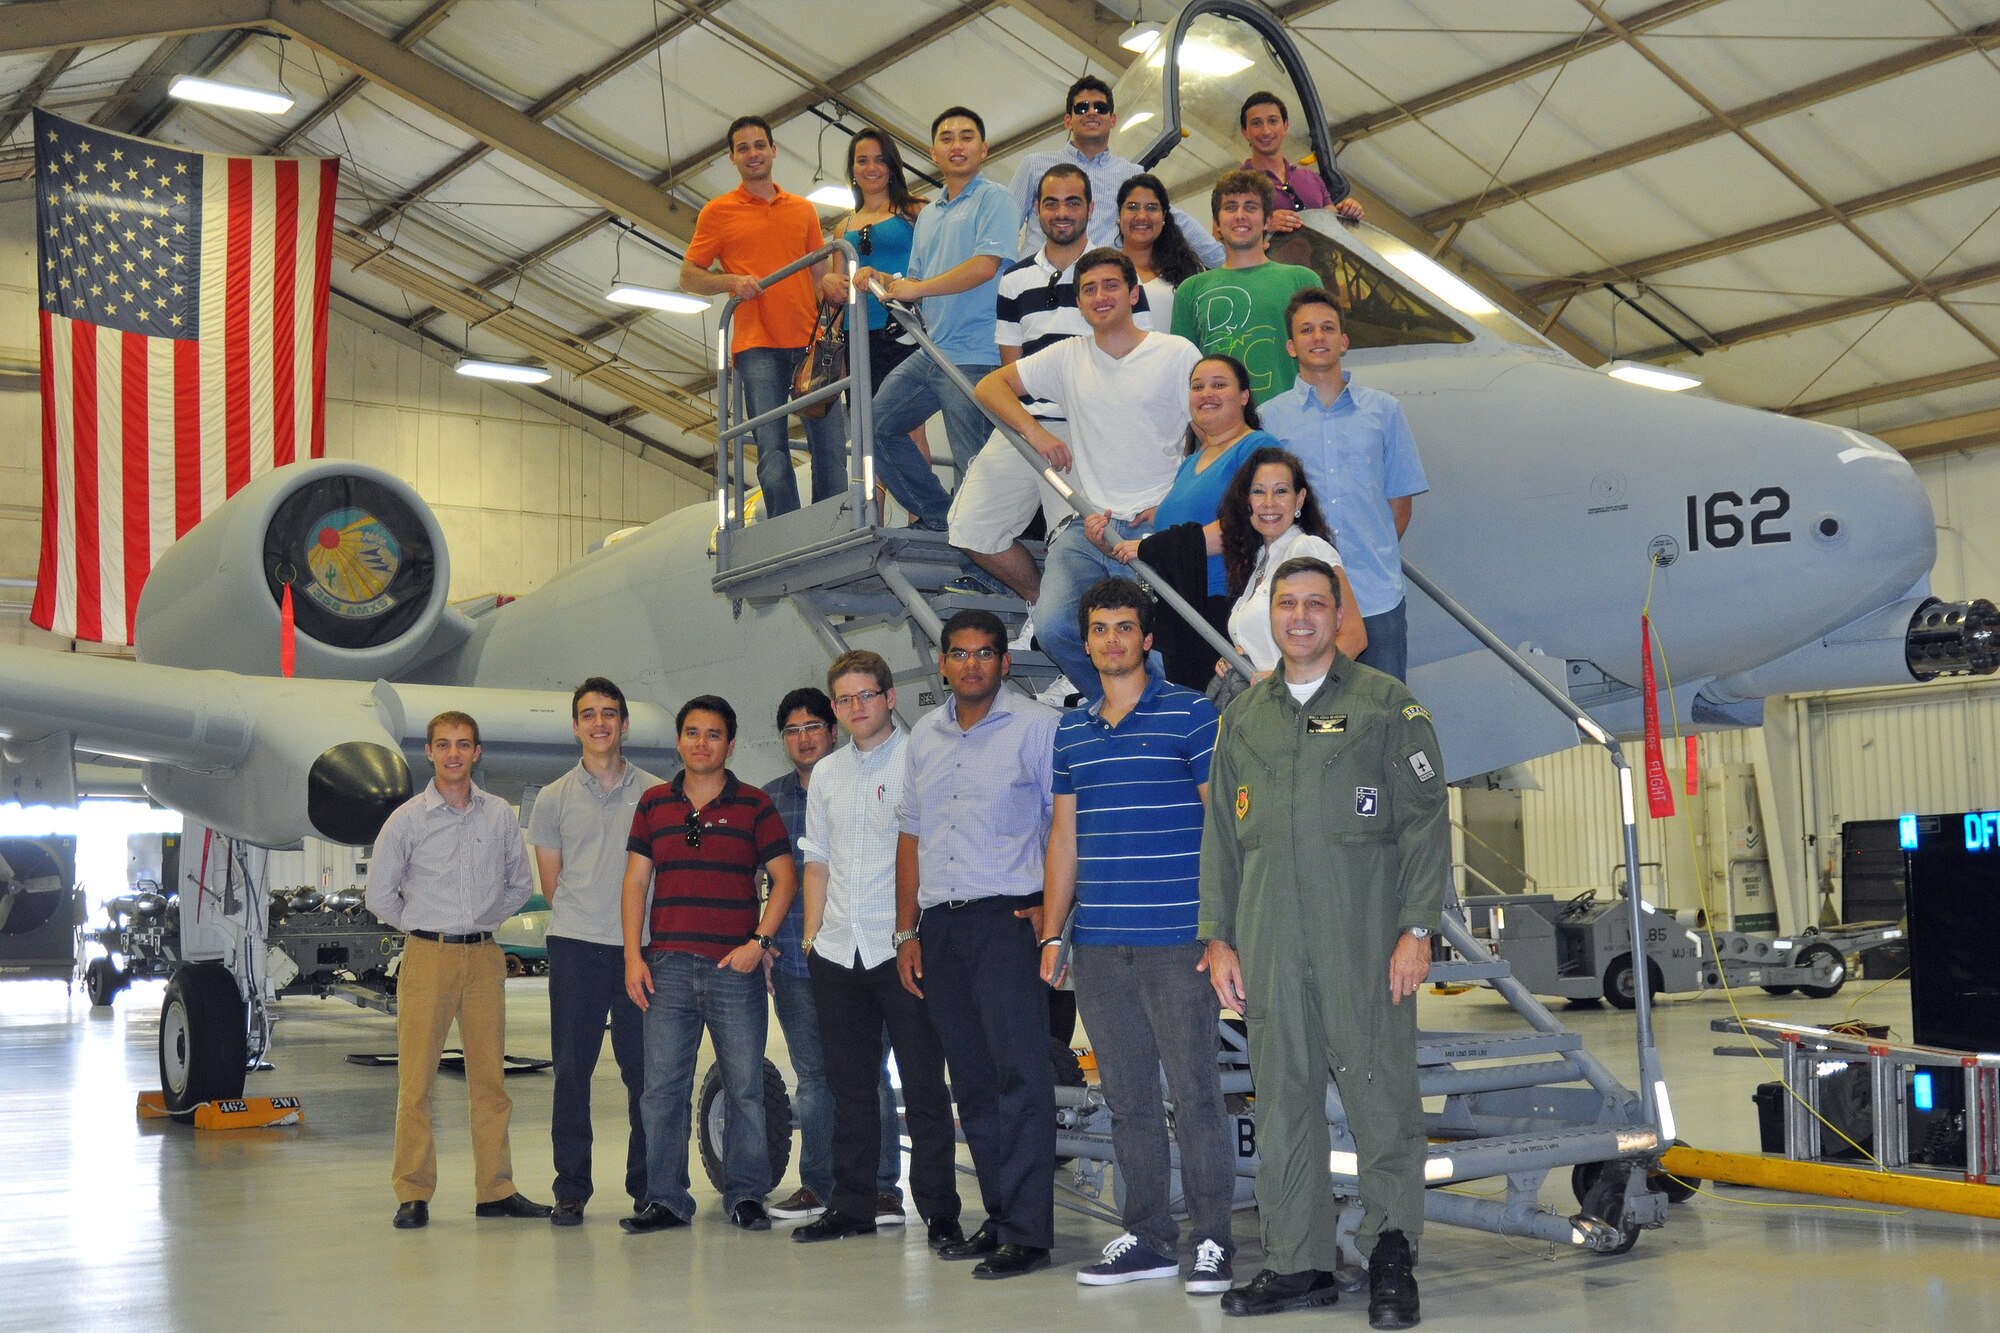 Graduate and doctoral engineering students from Brazil pose for a picture in front of a U.S. Air Force A-10 Thunderbolt II with Col. Paulo Vasconcellos, Brazilian Air Force liaison officer to Headquarters Twelfth Air Force (Air Forces Southern), during a tour of Davis-Monthan Air Force Base, July 24. The students were in Tucson, Ariz., visiting the nearby Raytheon Company as part of Brazil’s Science Without Borders program and requested the opportunity to visit D-M.  The A-10 is a close air support aircraft that has proven invaluable to the United States and its allies in operations including Desert Storm, Southern Watch, Provide Comfort, Desert Fox, Noble Anvil, Deny Flight, Deliberate Guard, Allied Force, Enduring Freedom and Iraqi Freedom. (U.S. Air Force photo/Capt. Jonathan Simmons)